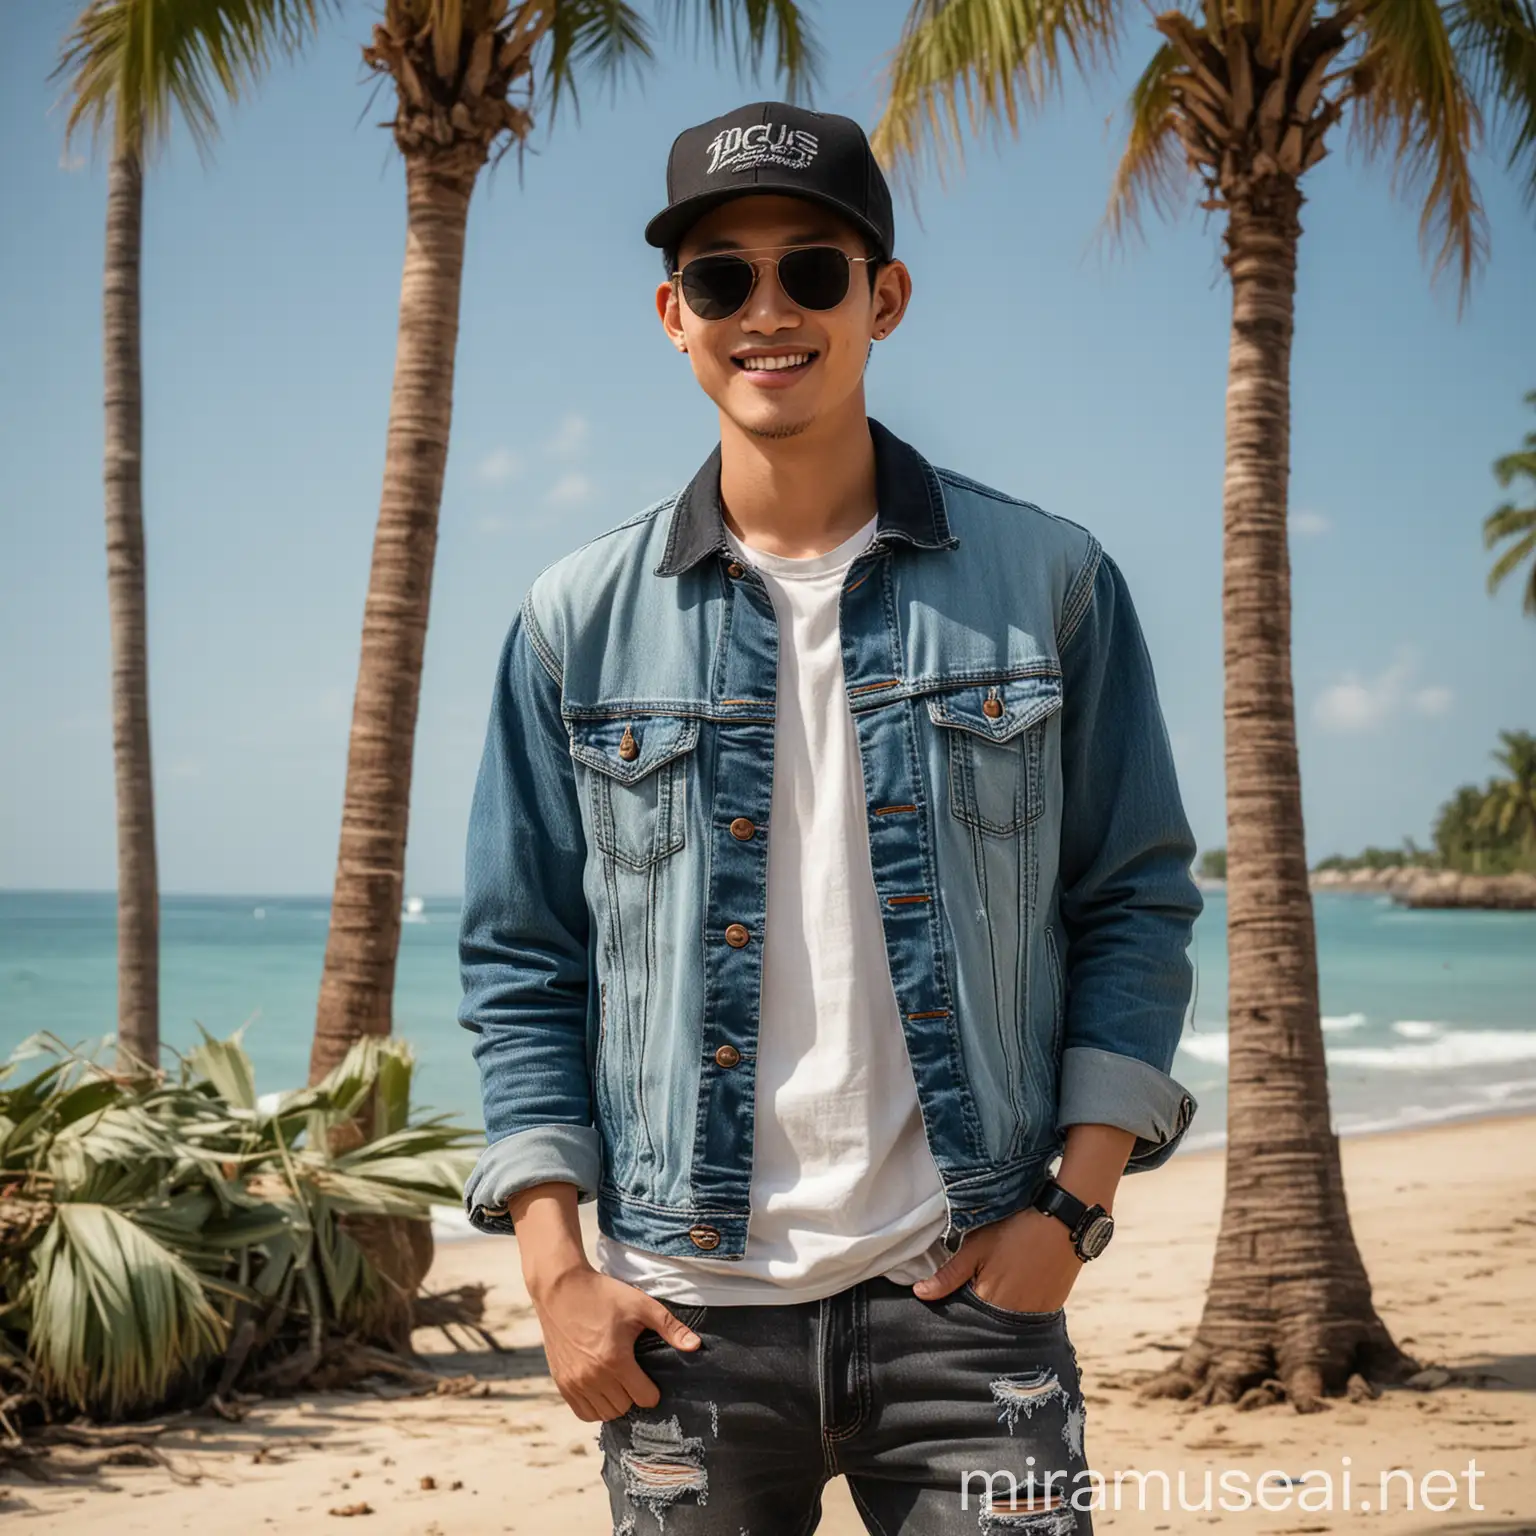 Asian Man Smiling on Beach in Daytime with Coconut Trees Wearing Black Cap and Sunglasses